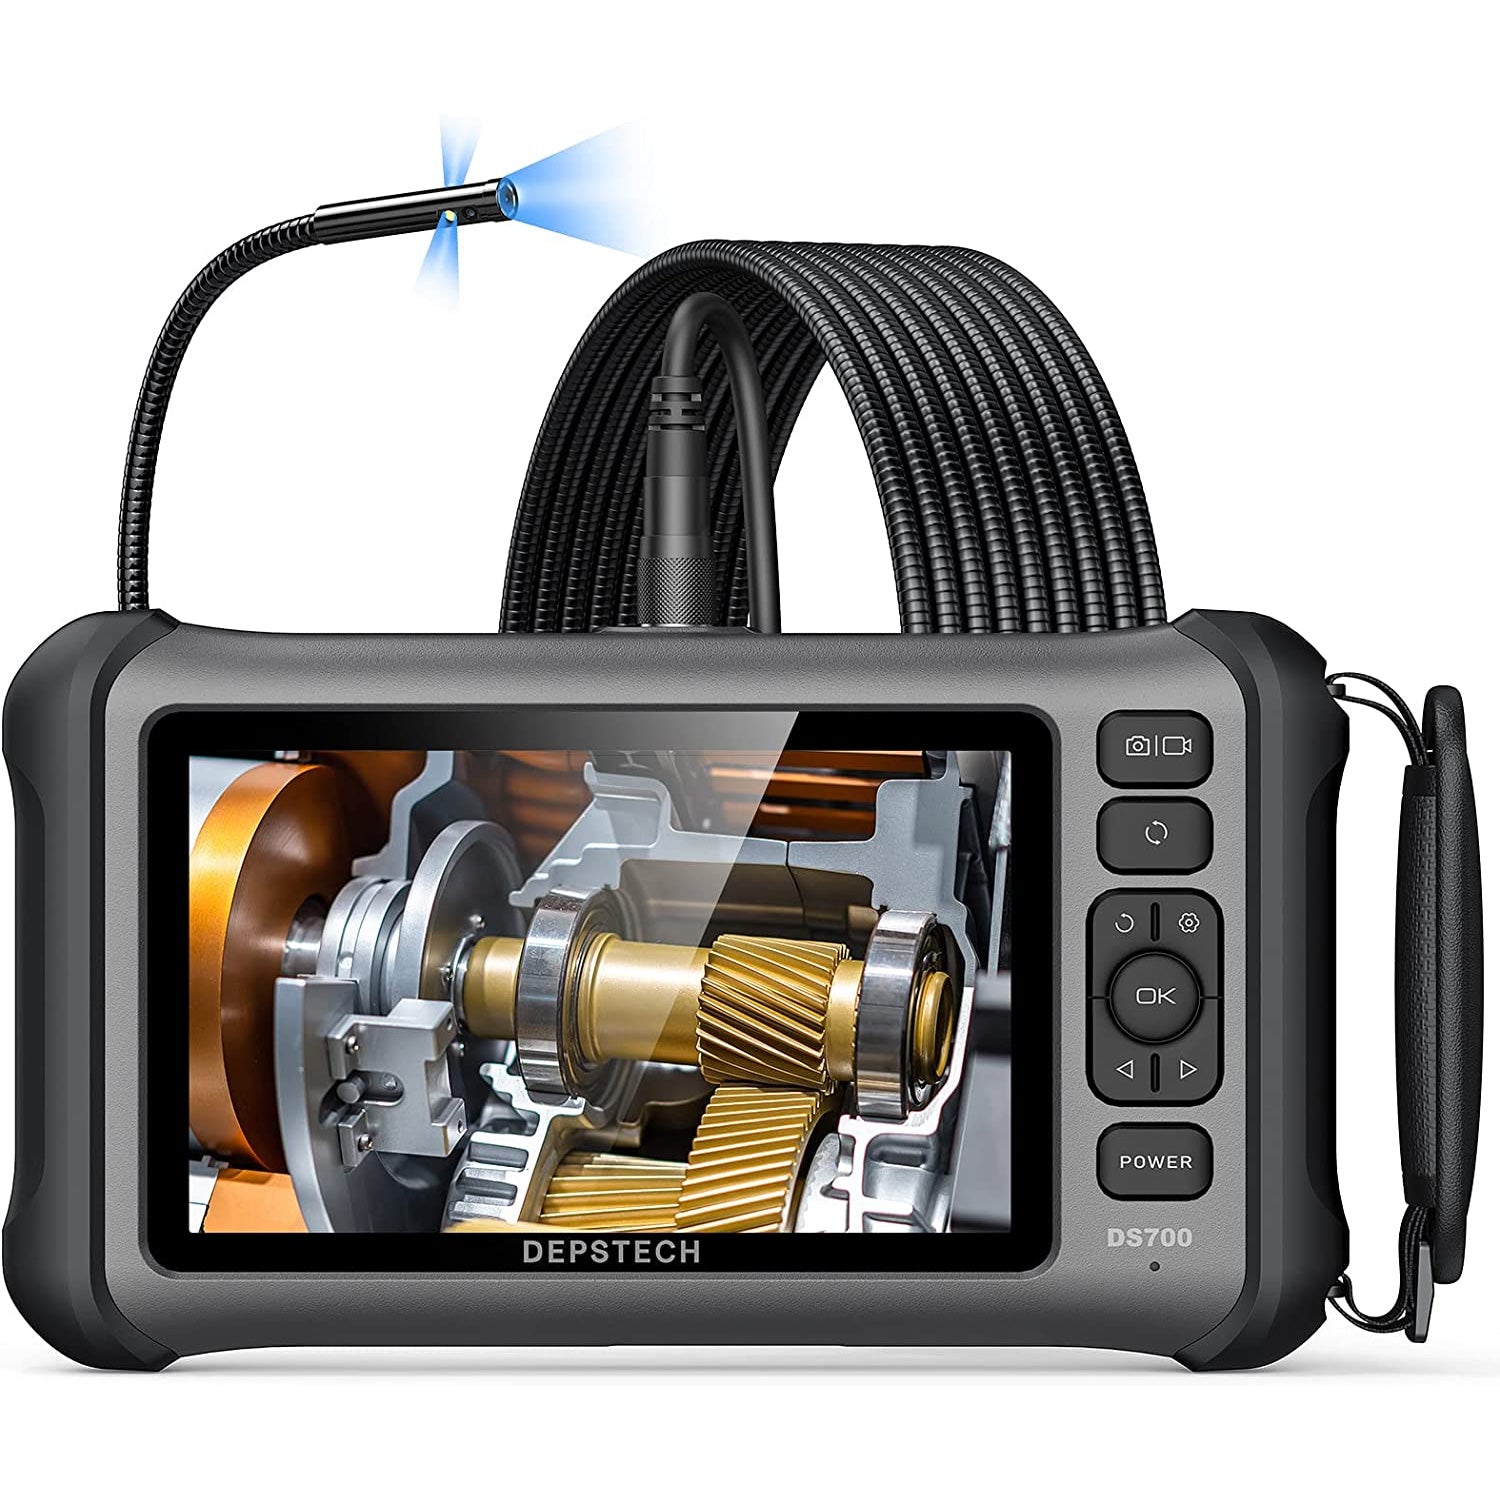 Triple Lens Borescope with 7'' IPS Screen, 1080p Endoscope Camera with Light